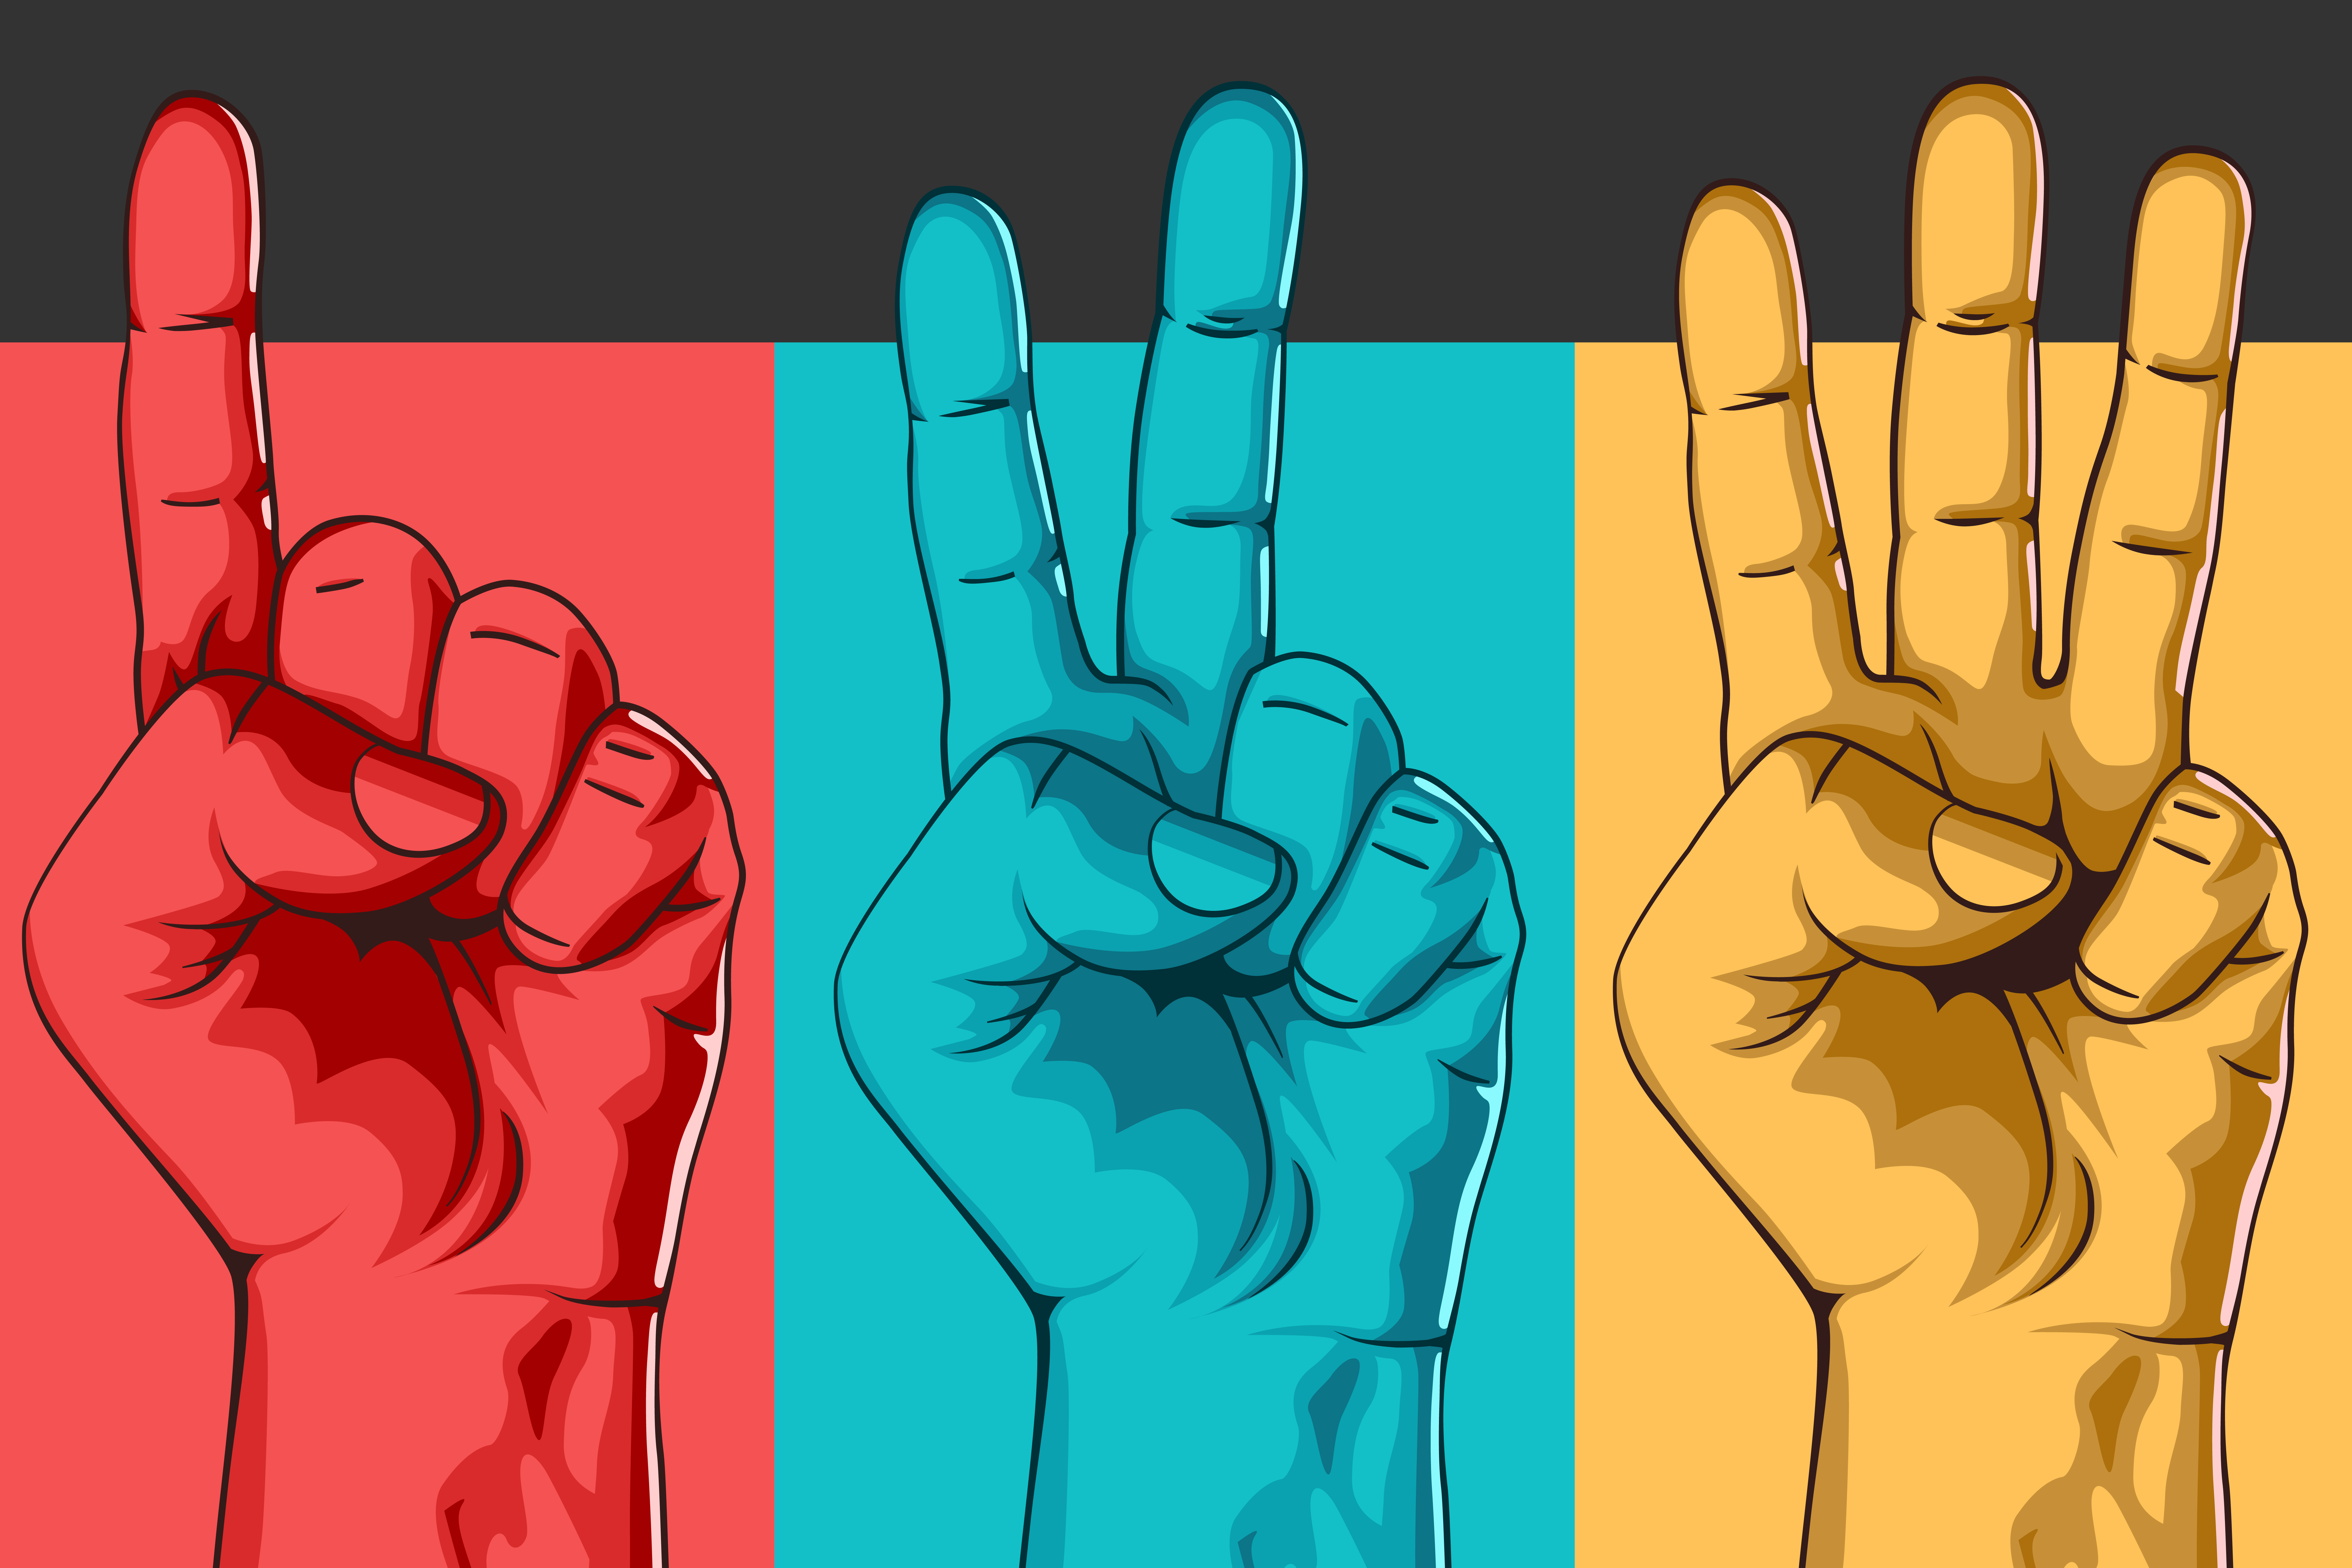 Three hands against a tri-colored background, each depicting a different sign for SEO logo concepts: the first is a finger pointing up, the second is making a peace sign, and the third is showing the